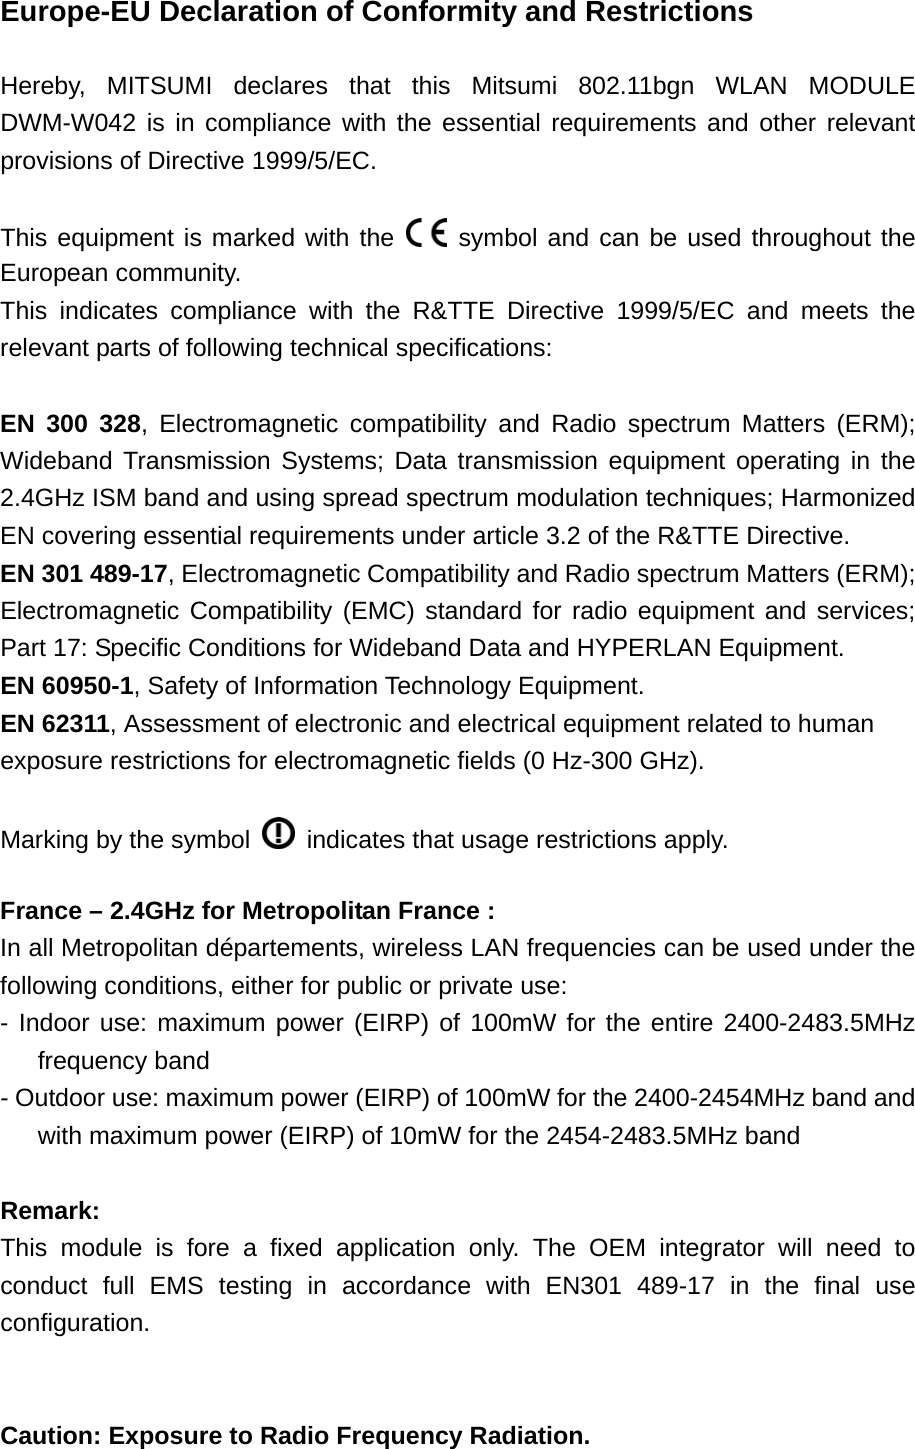 Europe-EU Declaration of Conformity and Restrictions  Hereby, MITSUMI declares that this Mitsumi 802.11bgn WLAN MODULE DWM-W042 is in compliance with the essential requirements and other relevant provisions of Directive 1999/5/EC.  This equipment is marked with the   symbol and can be used throughout the European community. This indicates compliance with the R&amp;TTE Directive 1999/5/EC and meets the relevant parts of following technical specifications:  EN 300 328, Electromagnetic compatibility and Radio spectrum Matters (ERM); Wideband Transmission Systems; Data transmission equipment operating in the 2.4GHz ISM band and using spread spectrum modulation techniques; Harmonized EN covering essential requirements under article 3.2 of the R&amp;TTE Directive. EN 301 489-17, Electromagnetic Compatibility and Radio spectrum Matters (ERM); Electromagnetic Compatibility (EMC) standard for radio equipment and services; Part 17: Specific Conditions for Wideband Data and HYPERLAN Equipment. EN 60950-1, Safety of Information Technology Equipment. EN 62311, Assessment of electronic and electrical equipment related to human exposure restrictions for electromagnetic fields (0 Hz-300 GHz).  Marking by the symbol    indicates that usage restrictions apply.  France – 2.4GHz for Metropolitan France : In all Metropolitan départements, wireless LAN frequencies can be used under the following conditions, either for public or private use: - Indoor use: maximum power (EIRP) of 100mW for the entire 2400-2483.5MHz frequency band - Outdoor use: maximum power (EIRP) of 100mW for the 2400-2454MHz band and with maximum power (EIRP) of 10mW for the 2454-2483.5MHz band  Remark:  This module is fore a fixed application only. The OEM integrator will need to conduct full EMS testing in accordance with EN301 489-17 in the final use configuration.   Caution: Exposure to Radio Frequency Radiation. 